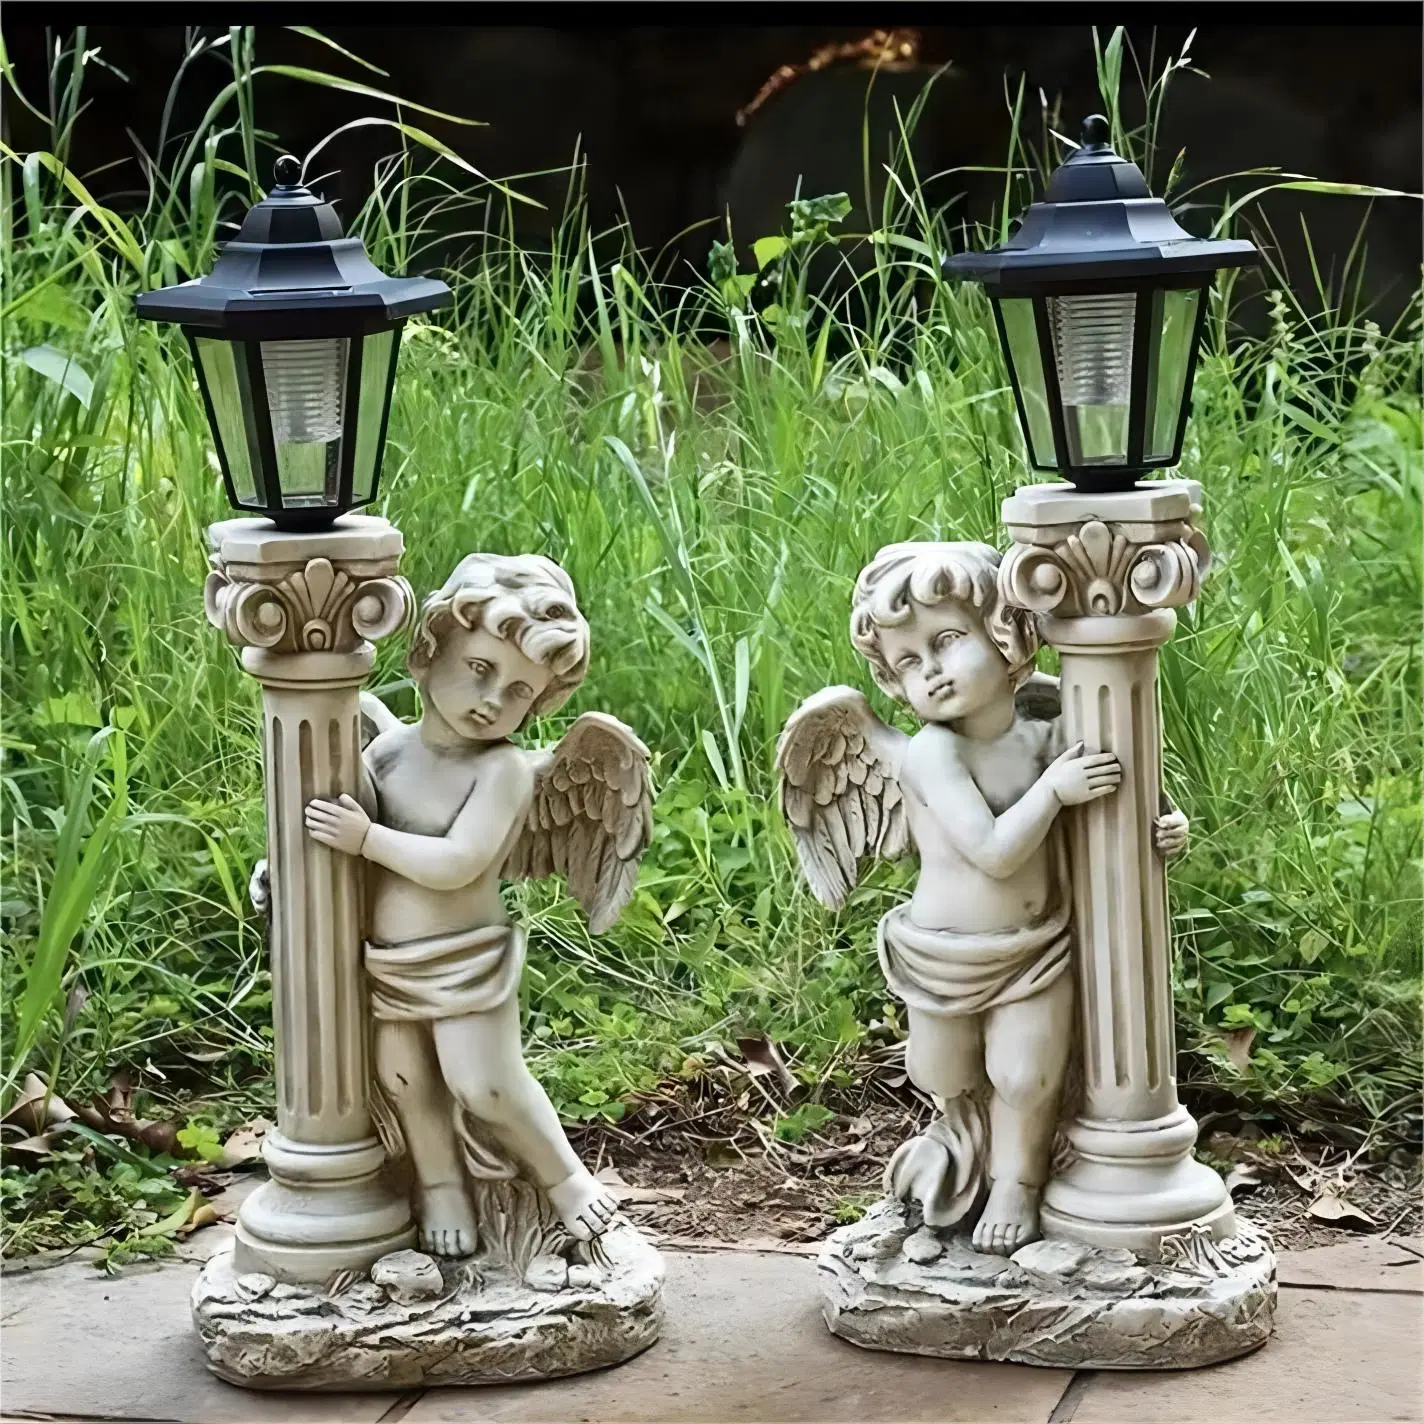 OEM Factory Customized IP44 Waterproof Solar Powered Garden Lamps Resin Garden Crafts LED Lighting Outdoor Lamp Solar Outdoor Lighting Manufacturer in China